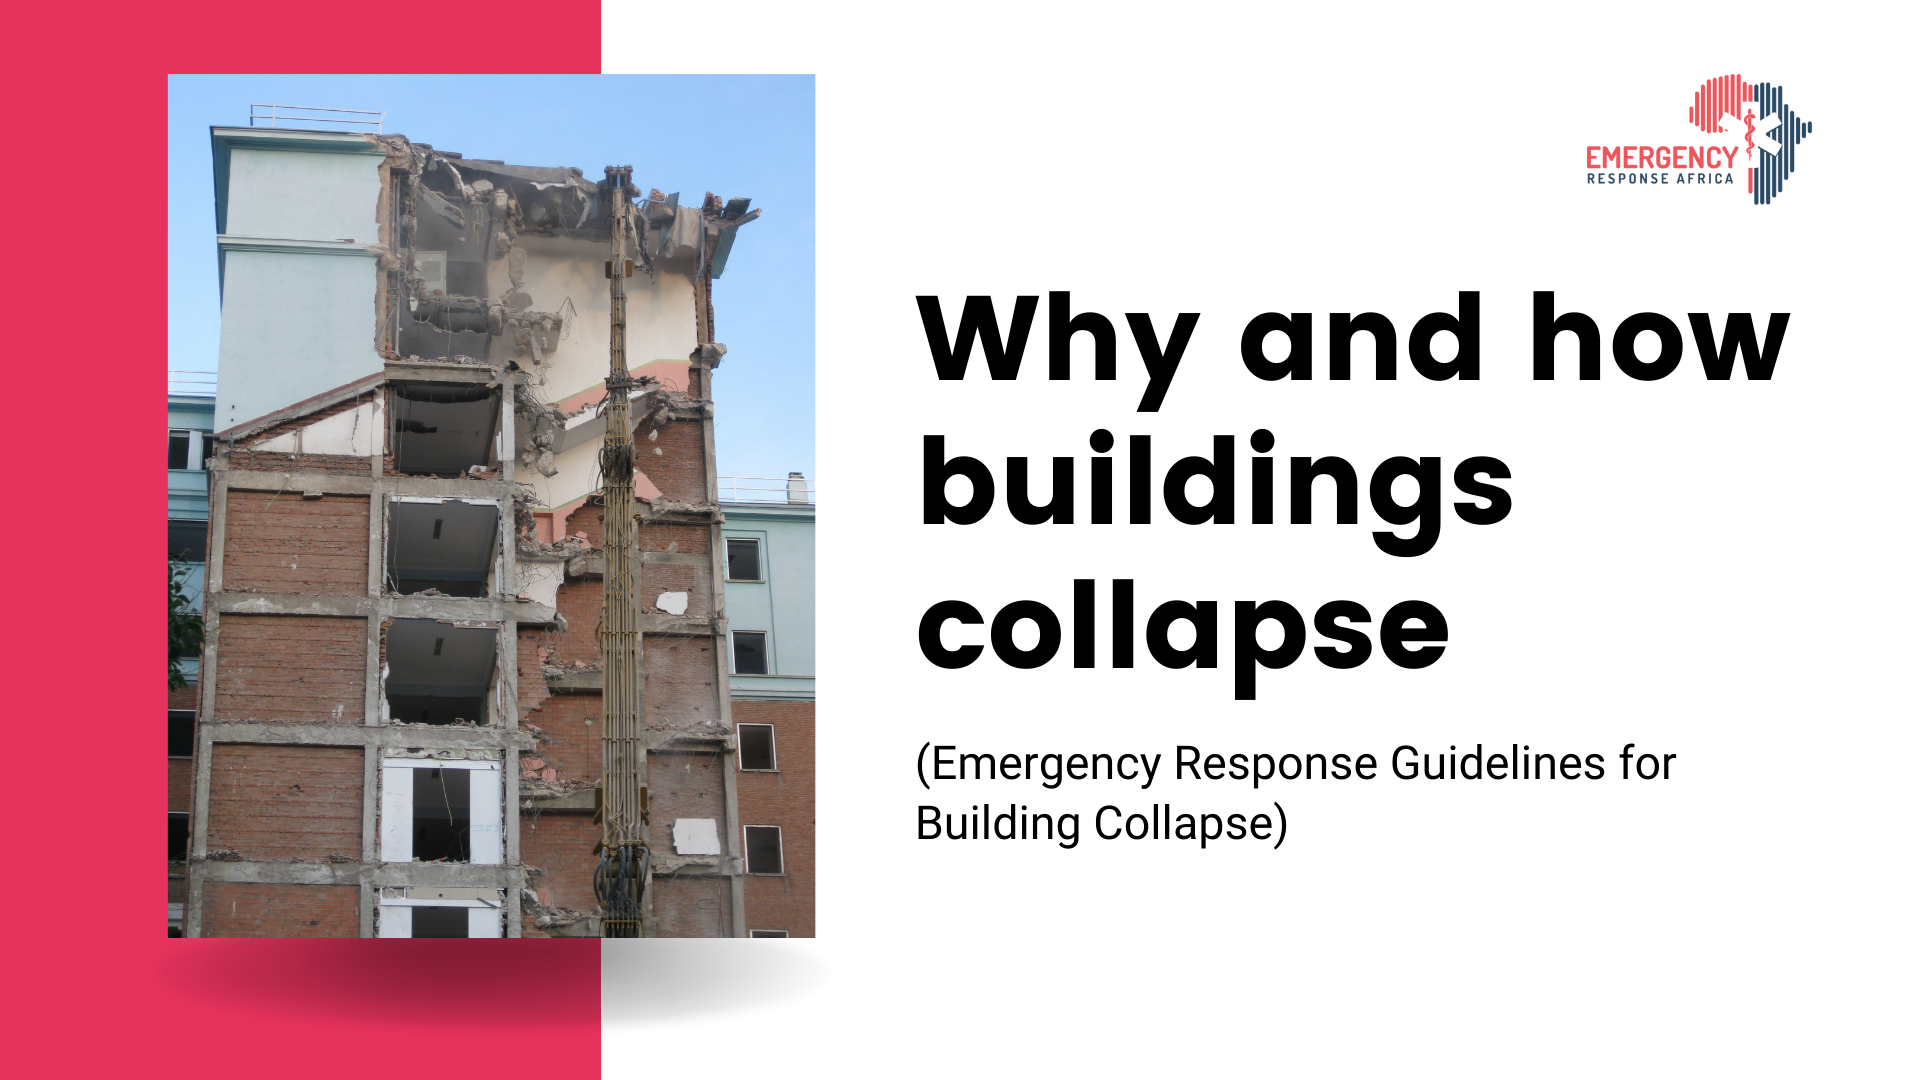 why buildings fall down